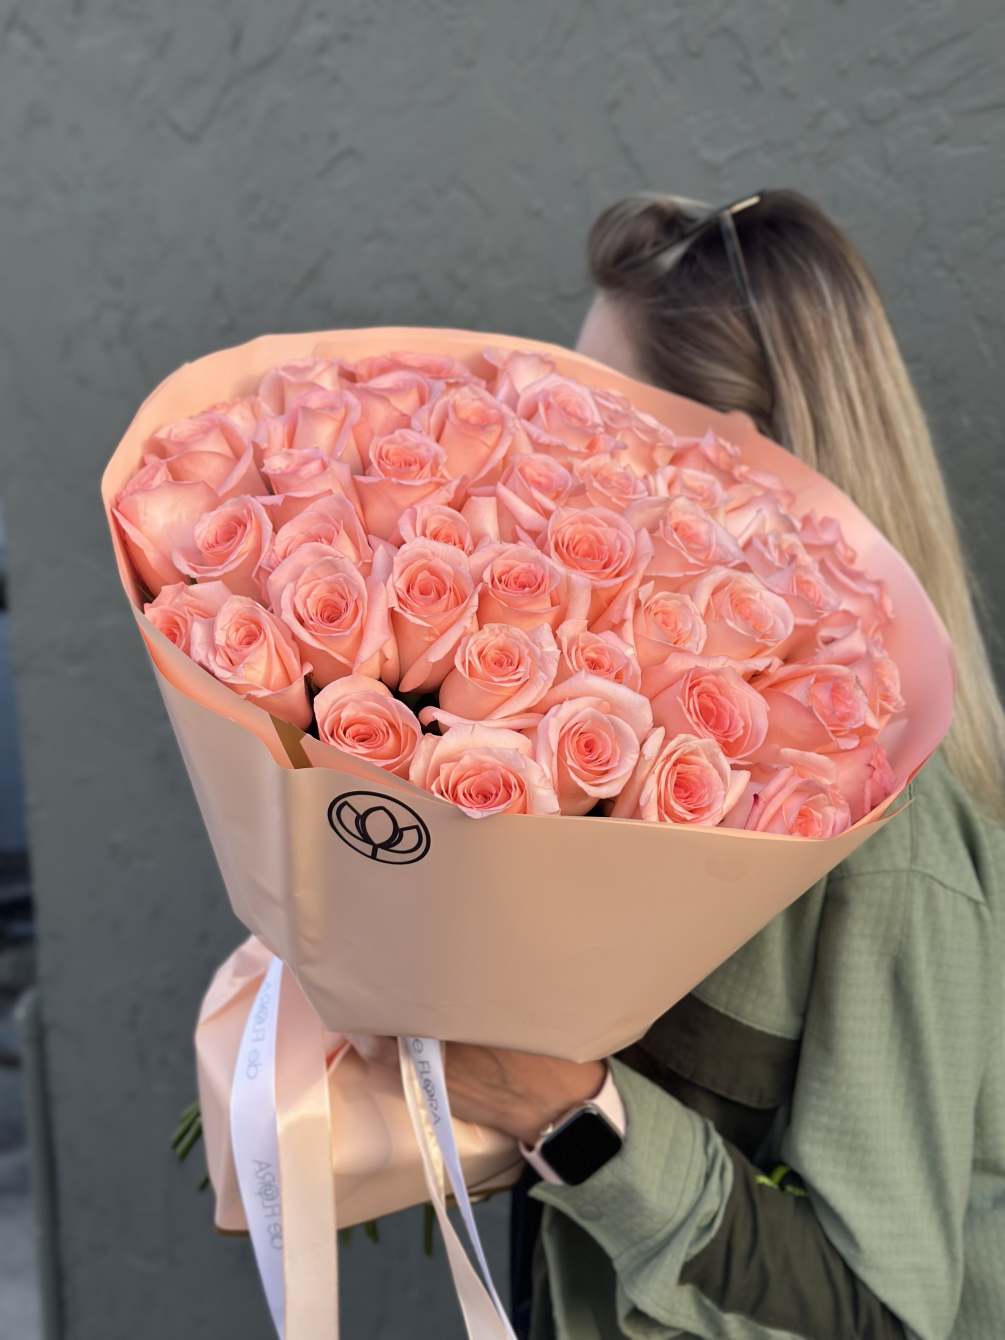 Premium peach roses in a bouquet 
Standard - 48-50 stems
Deluxe - 73-75